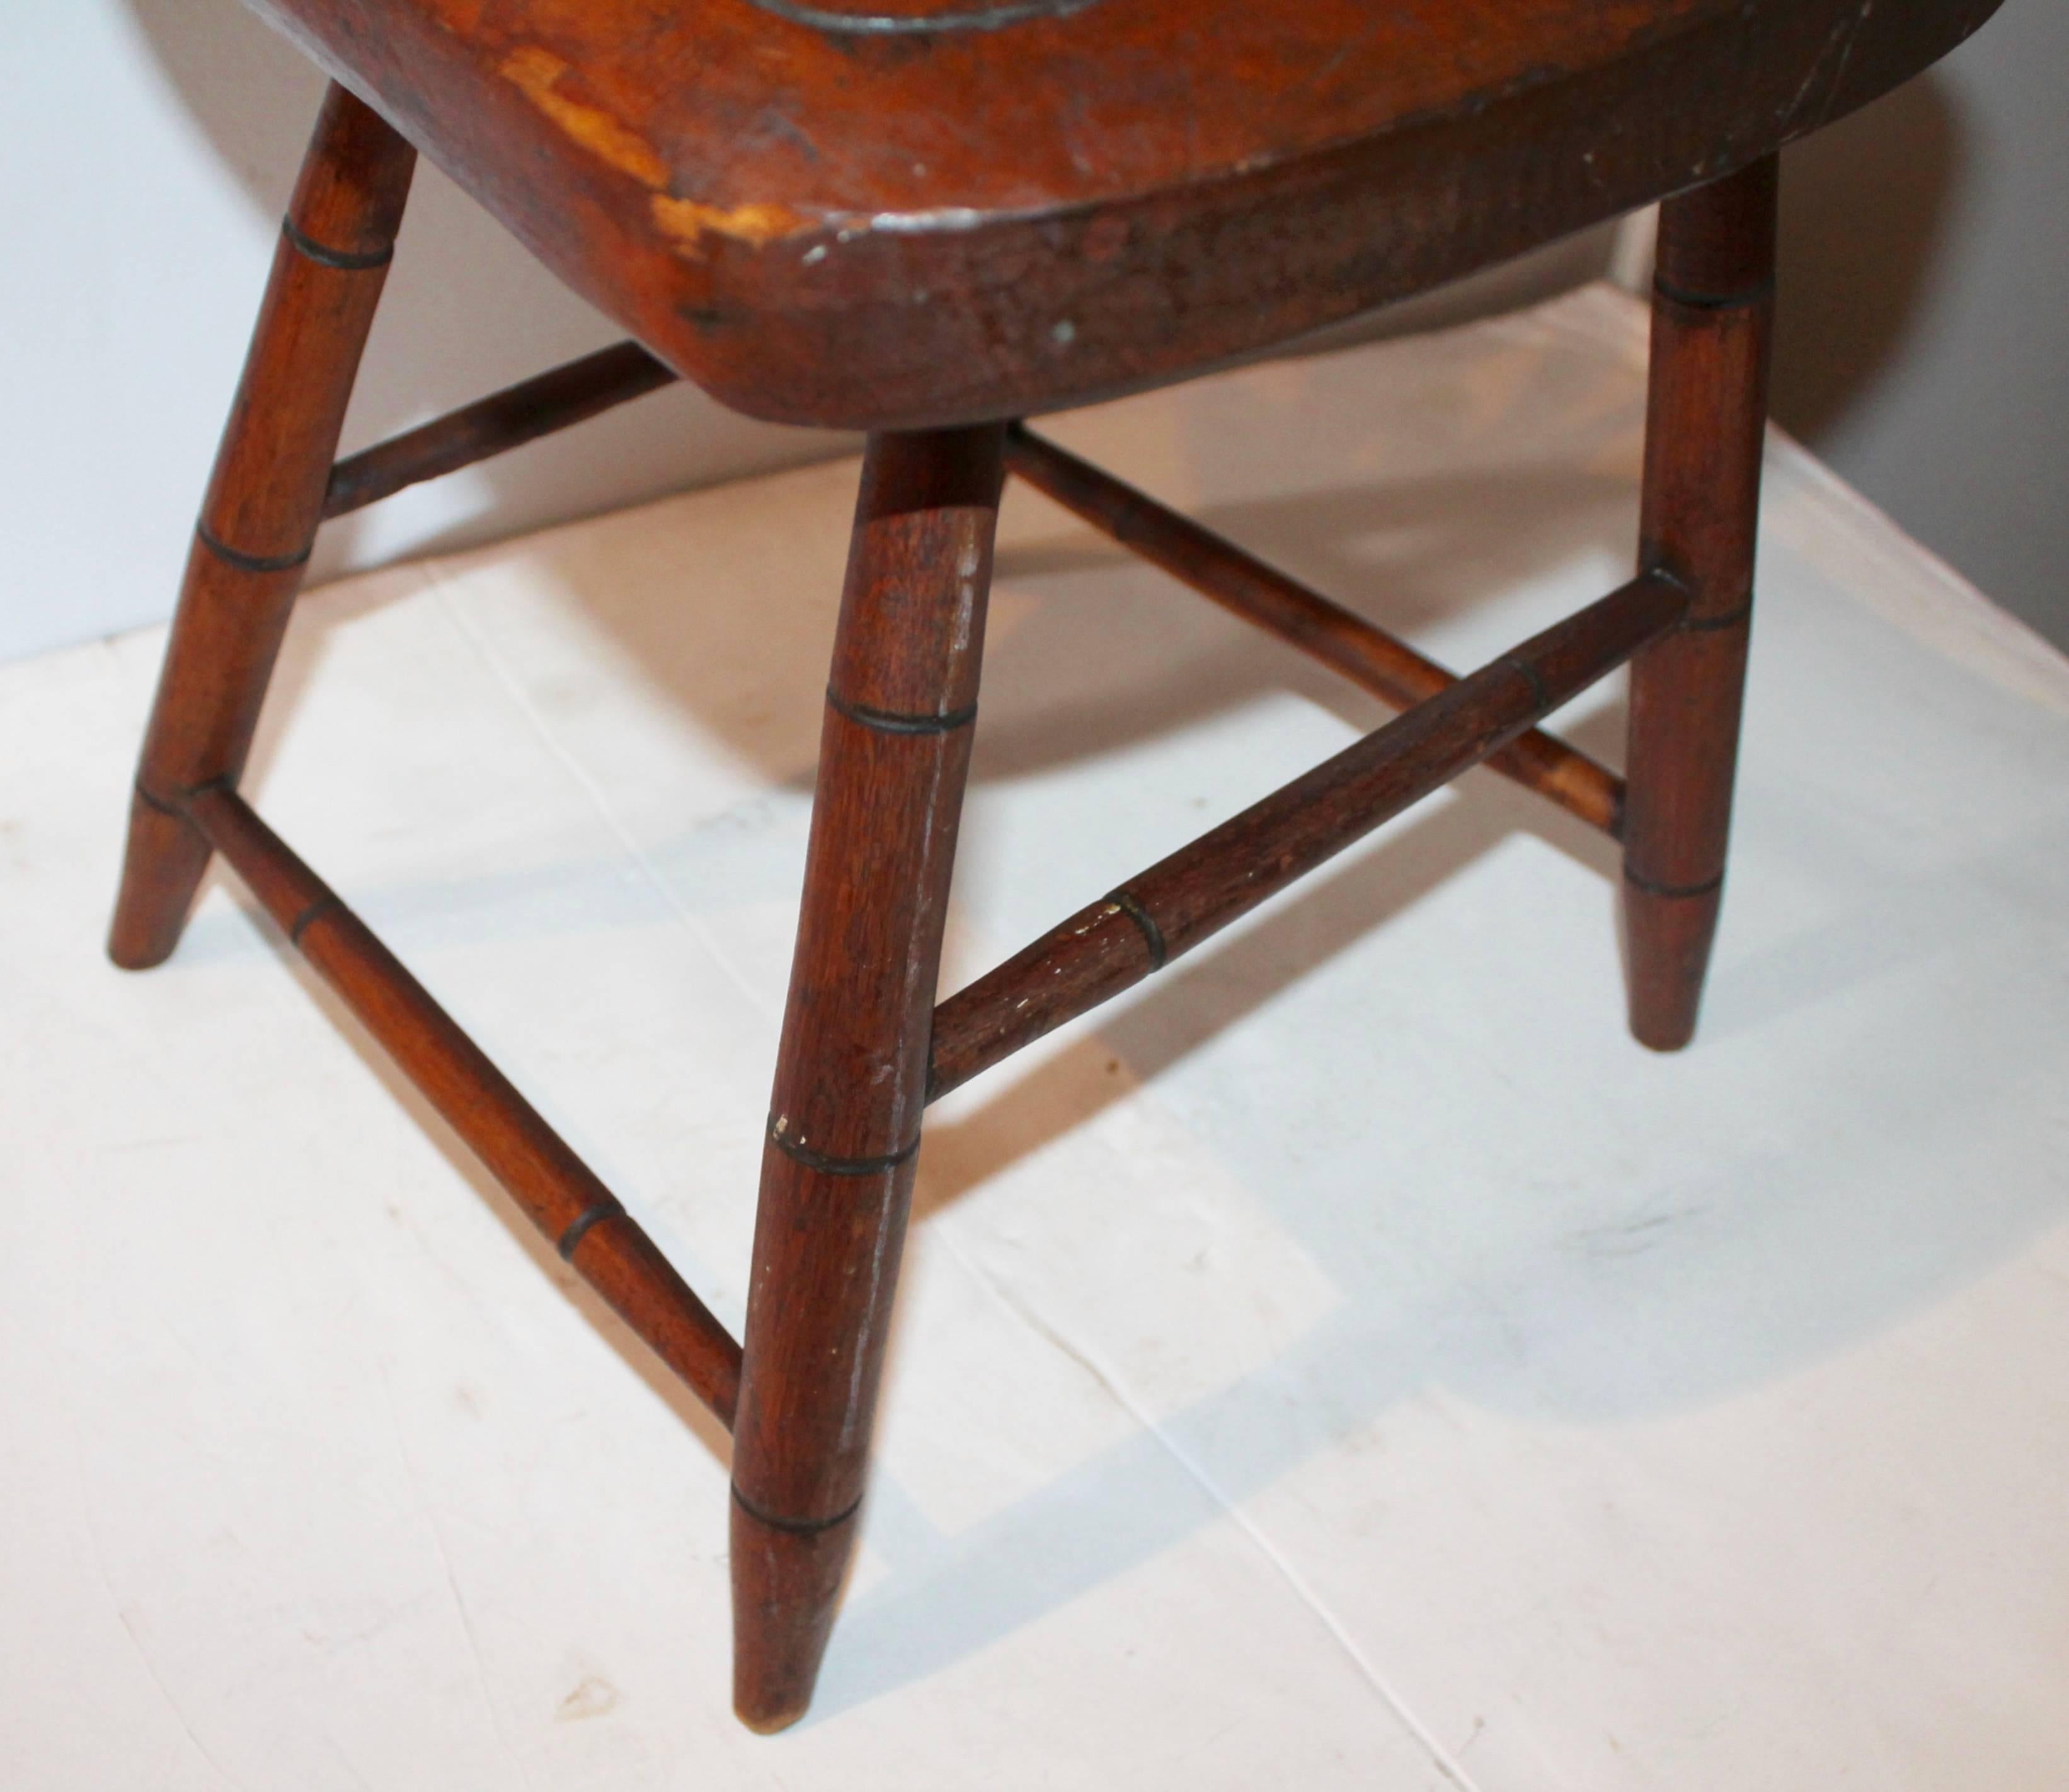 Pine Amazing Early 19th Century Child's Thumbtack/Arrowback Windsor Chair For Sale